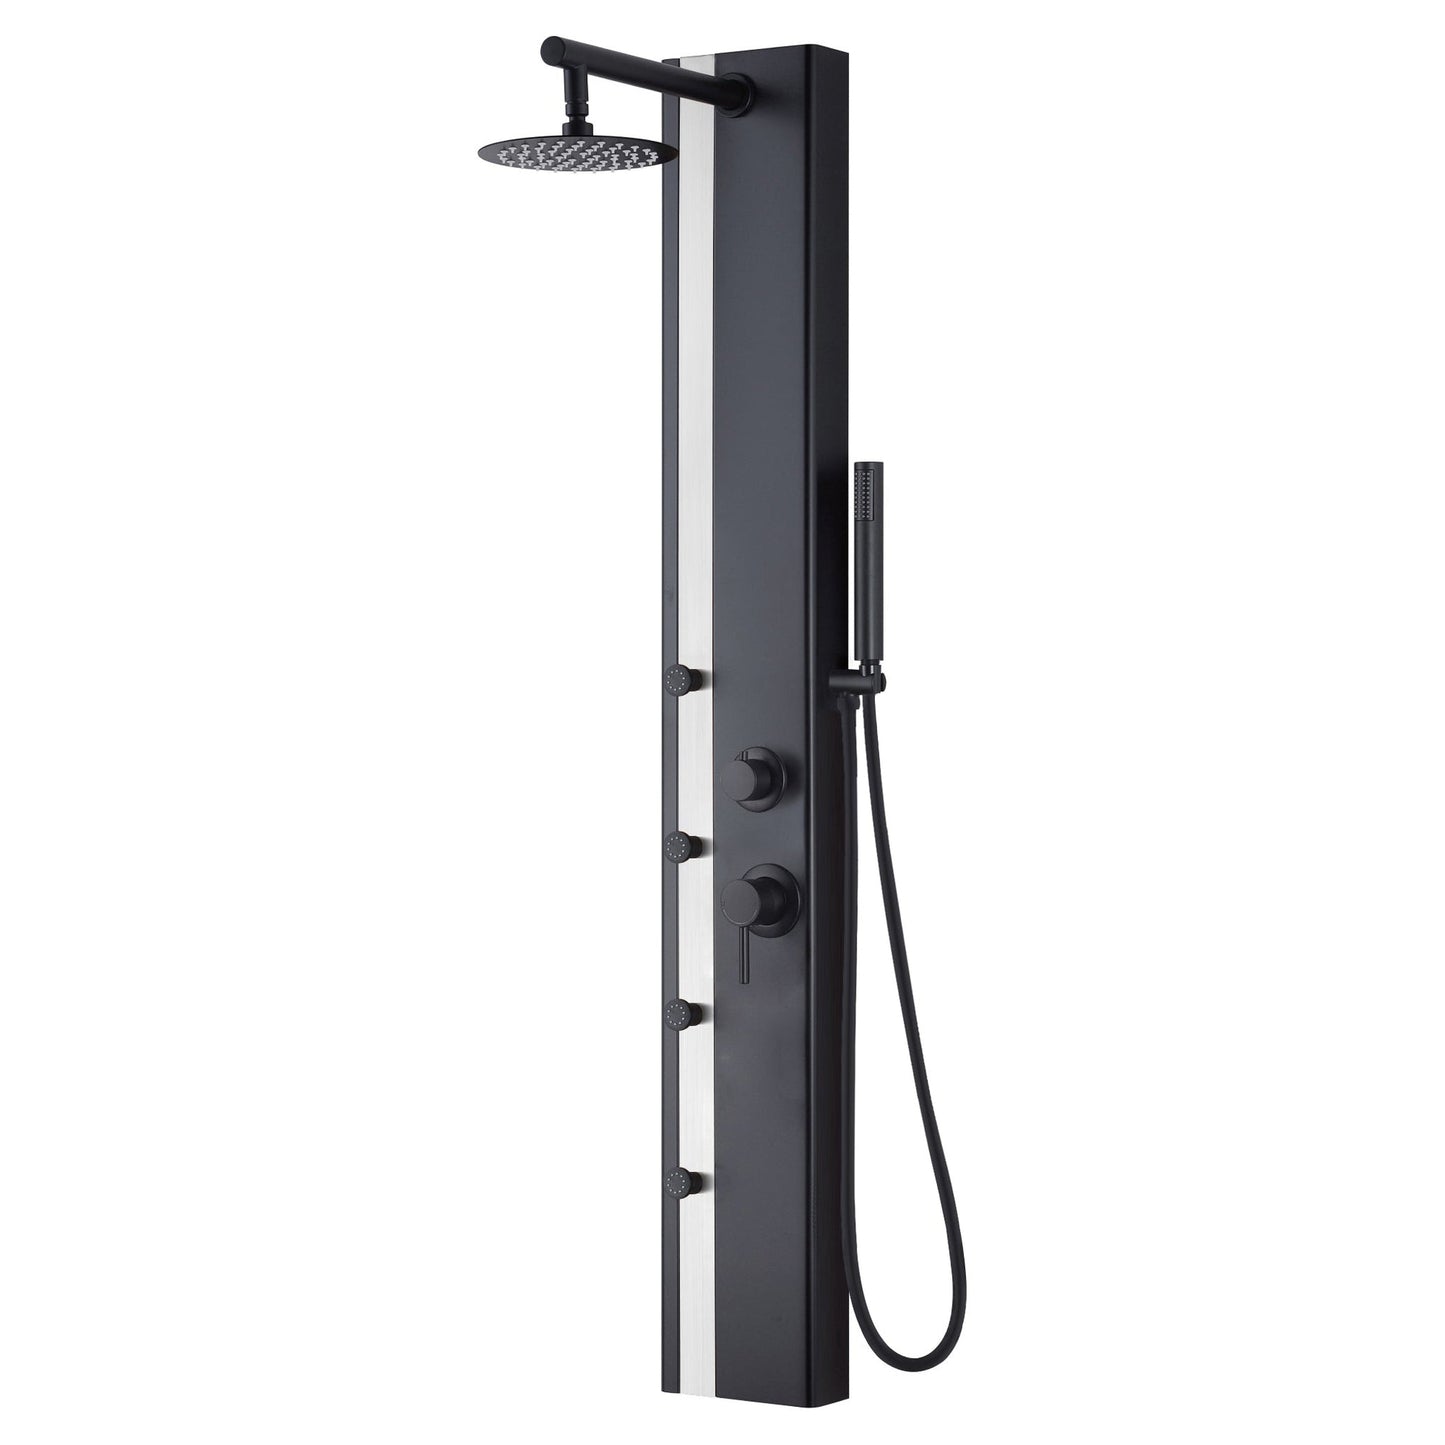 PULSE ShowerSpas Eclipse 57" Rain Shower Panel 2.5 GPM in Matte Black and Brushed Stainless Steel Finish With 4-Body Jet and Handheld Shower